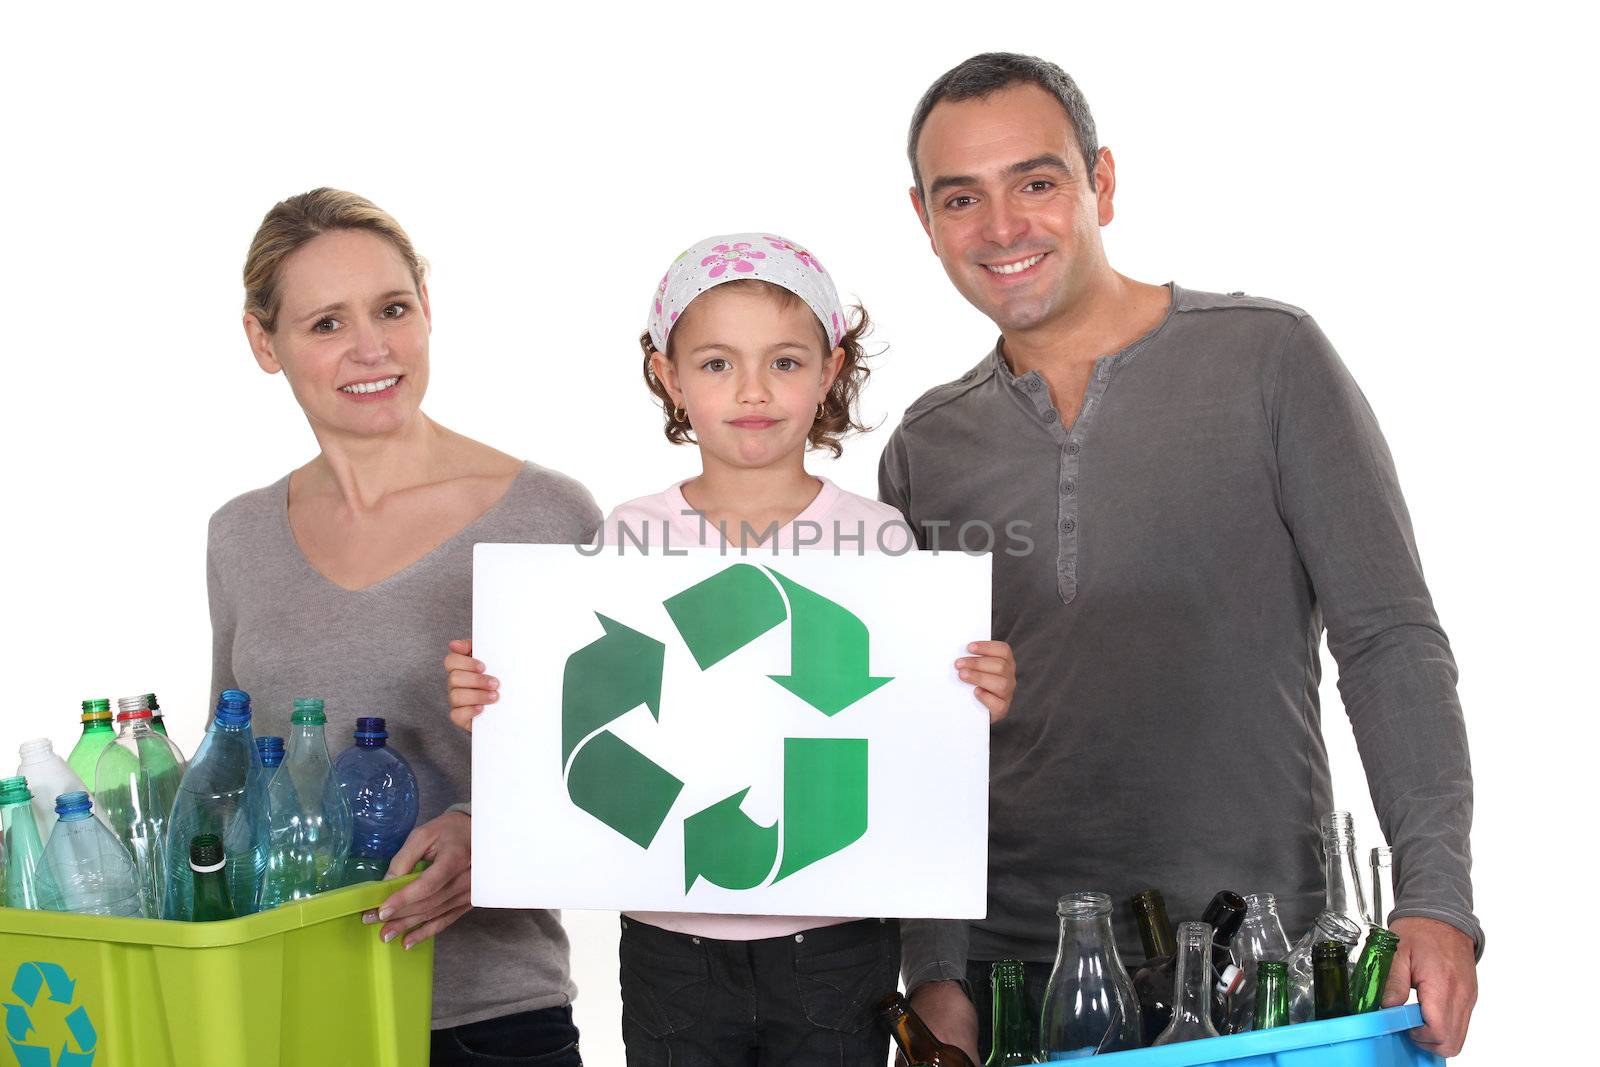 family waste sorting